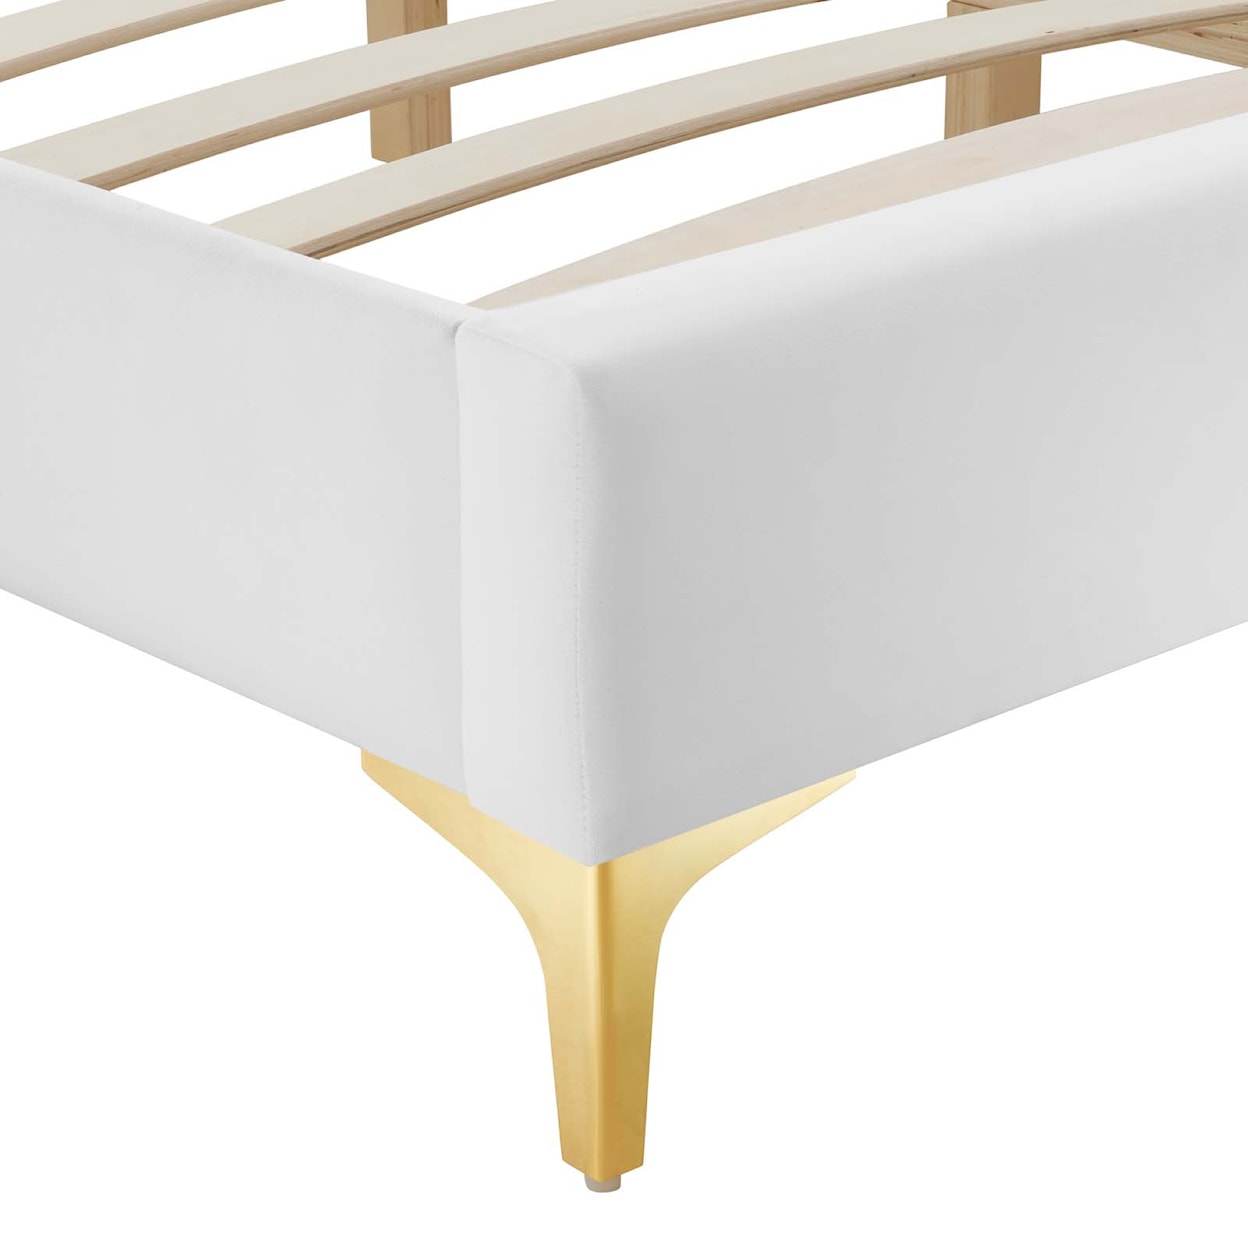 Modway Sutton Twin Bed Frame